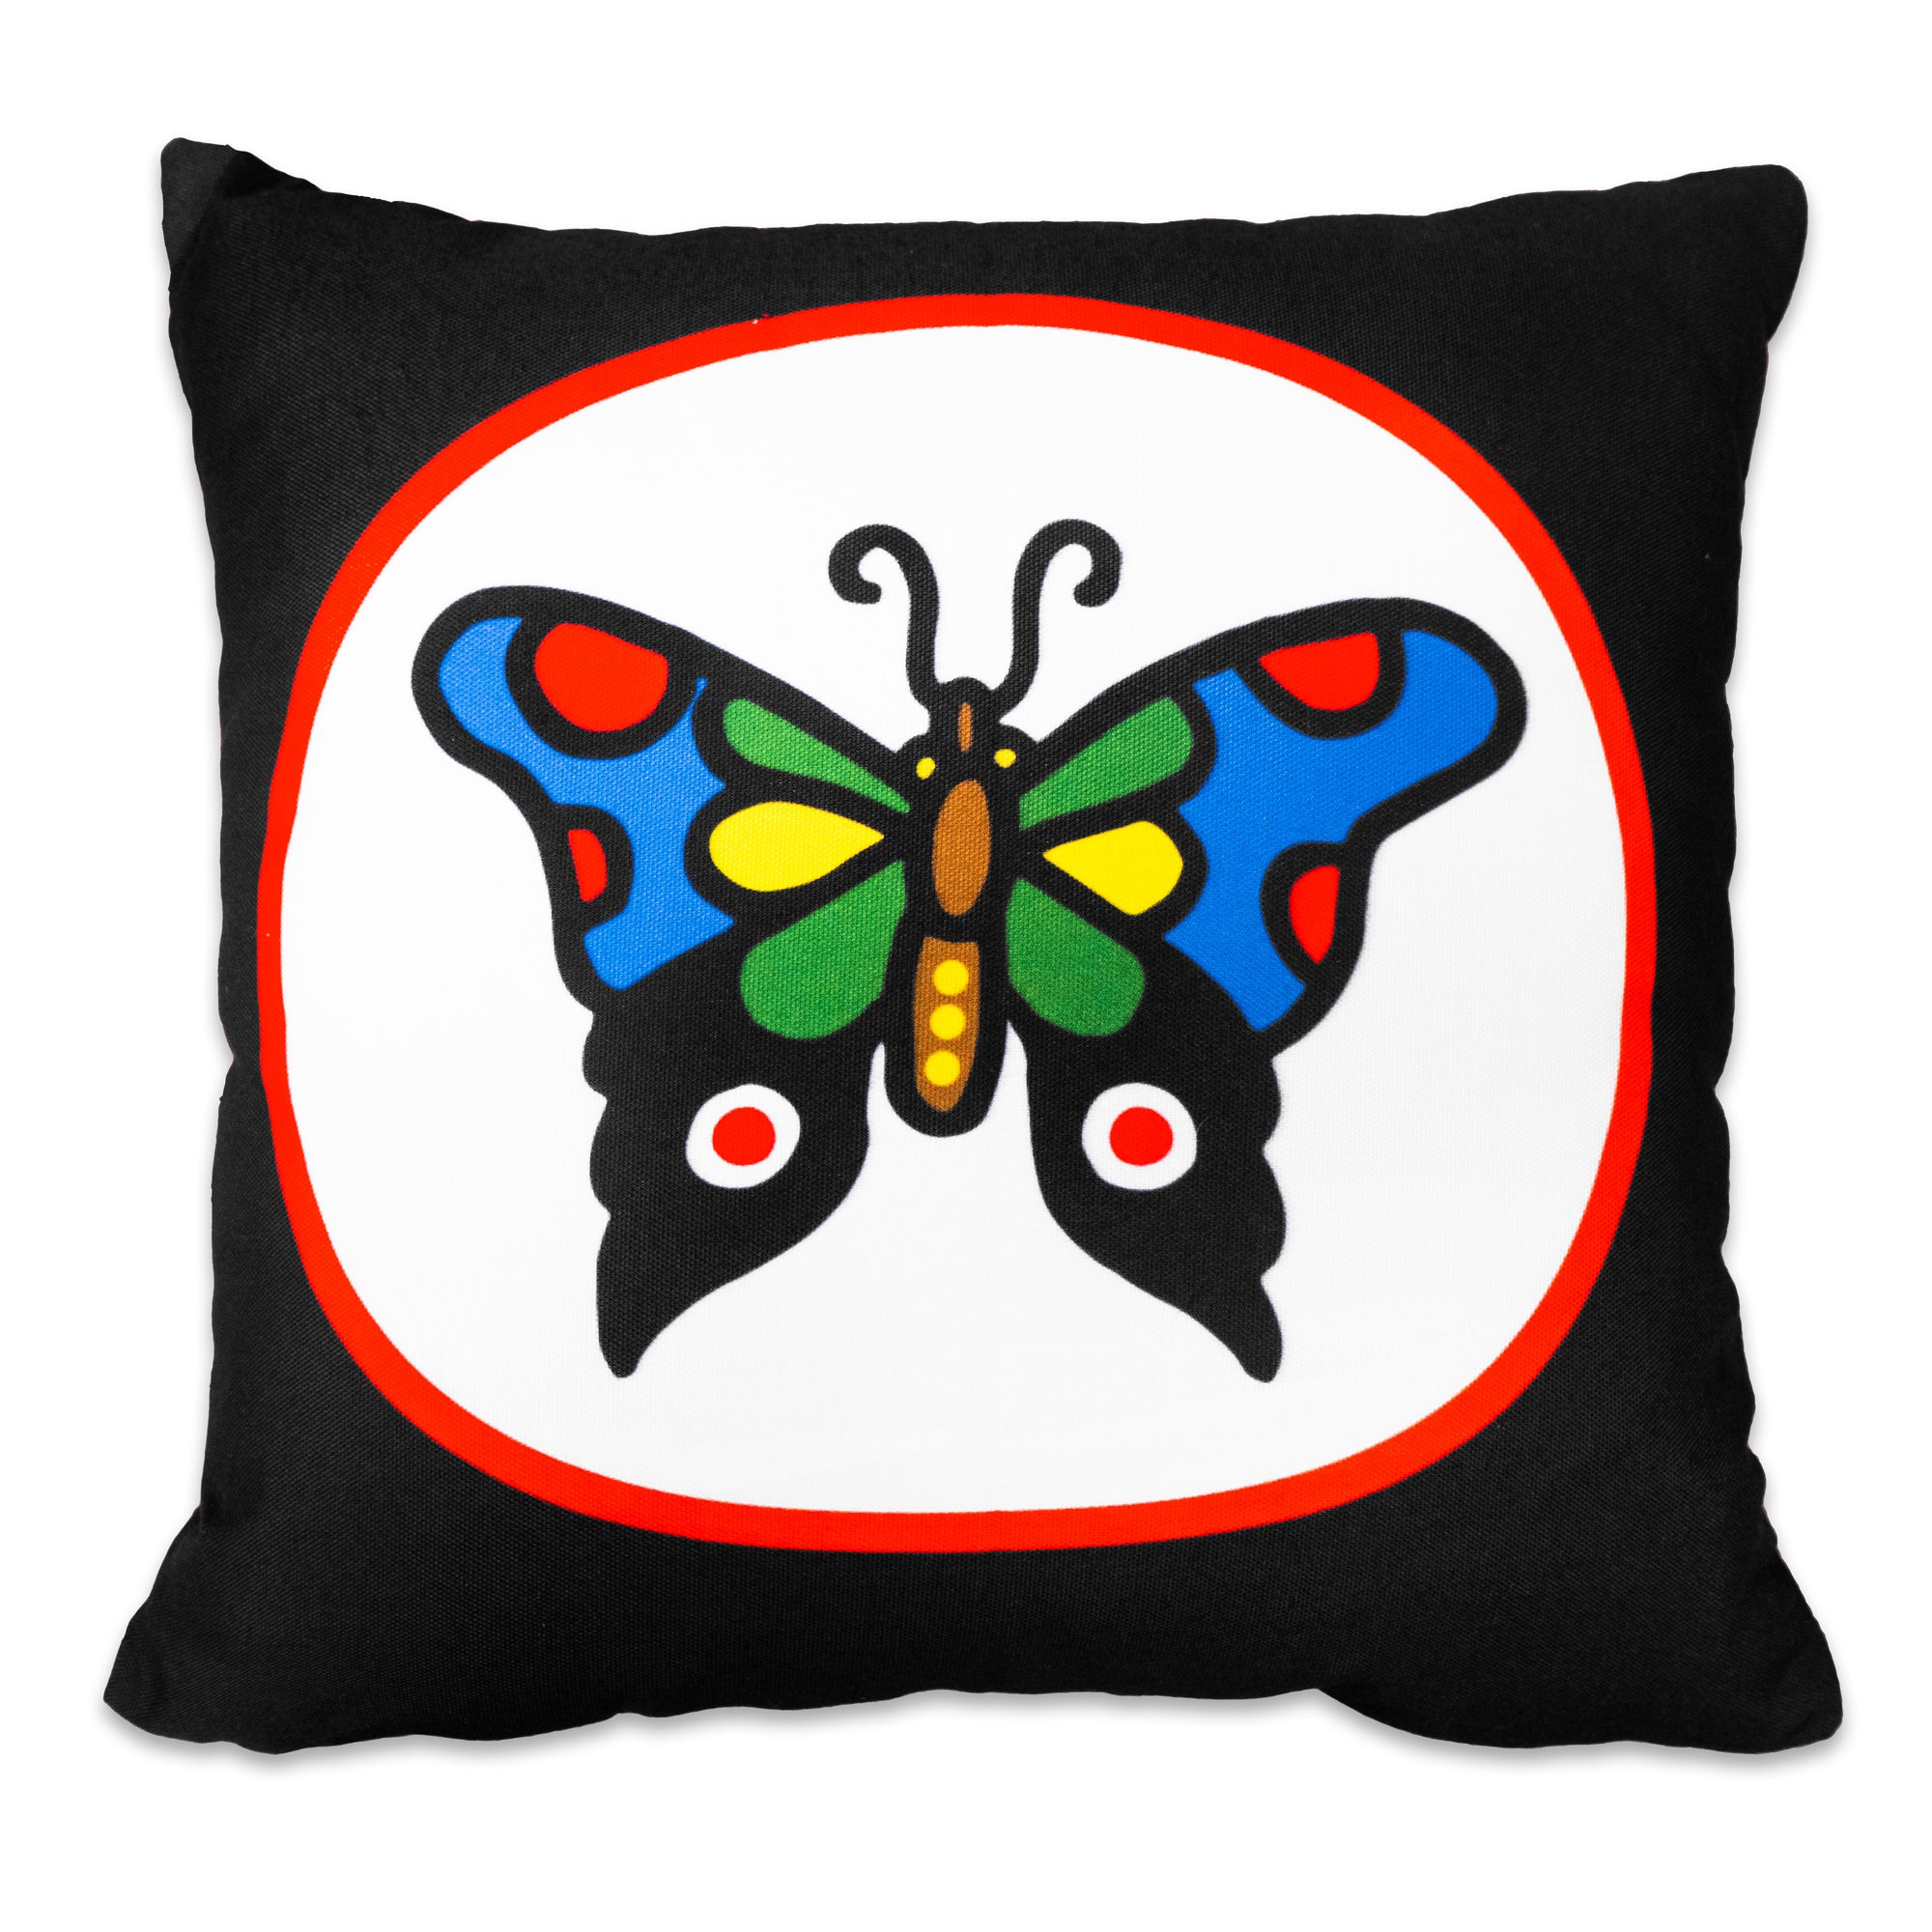 The "Angry Flower & Butterfly" Pillow by No Fun®. Pillow is black, with a double sided design. This side has a red and white oval, with a multi coloured cartoon butterfly in the center. 